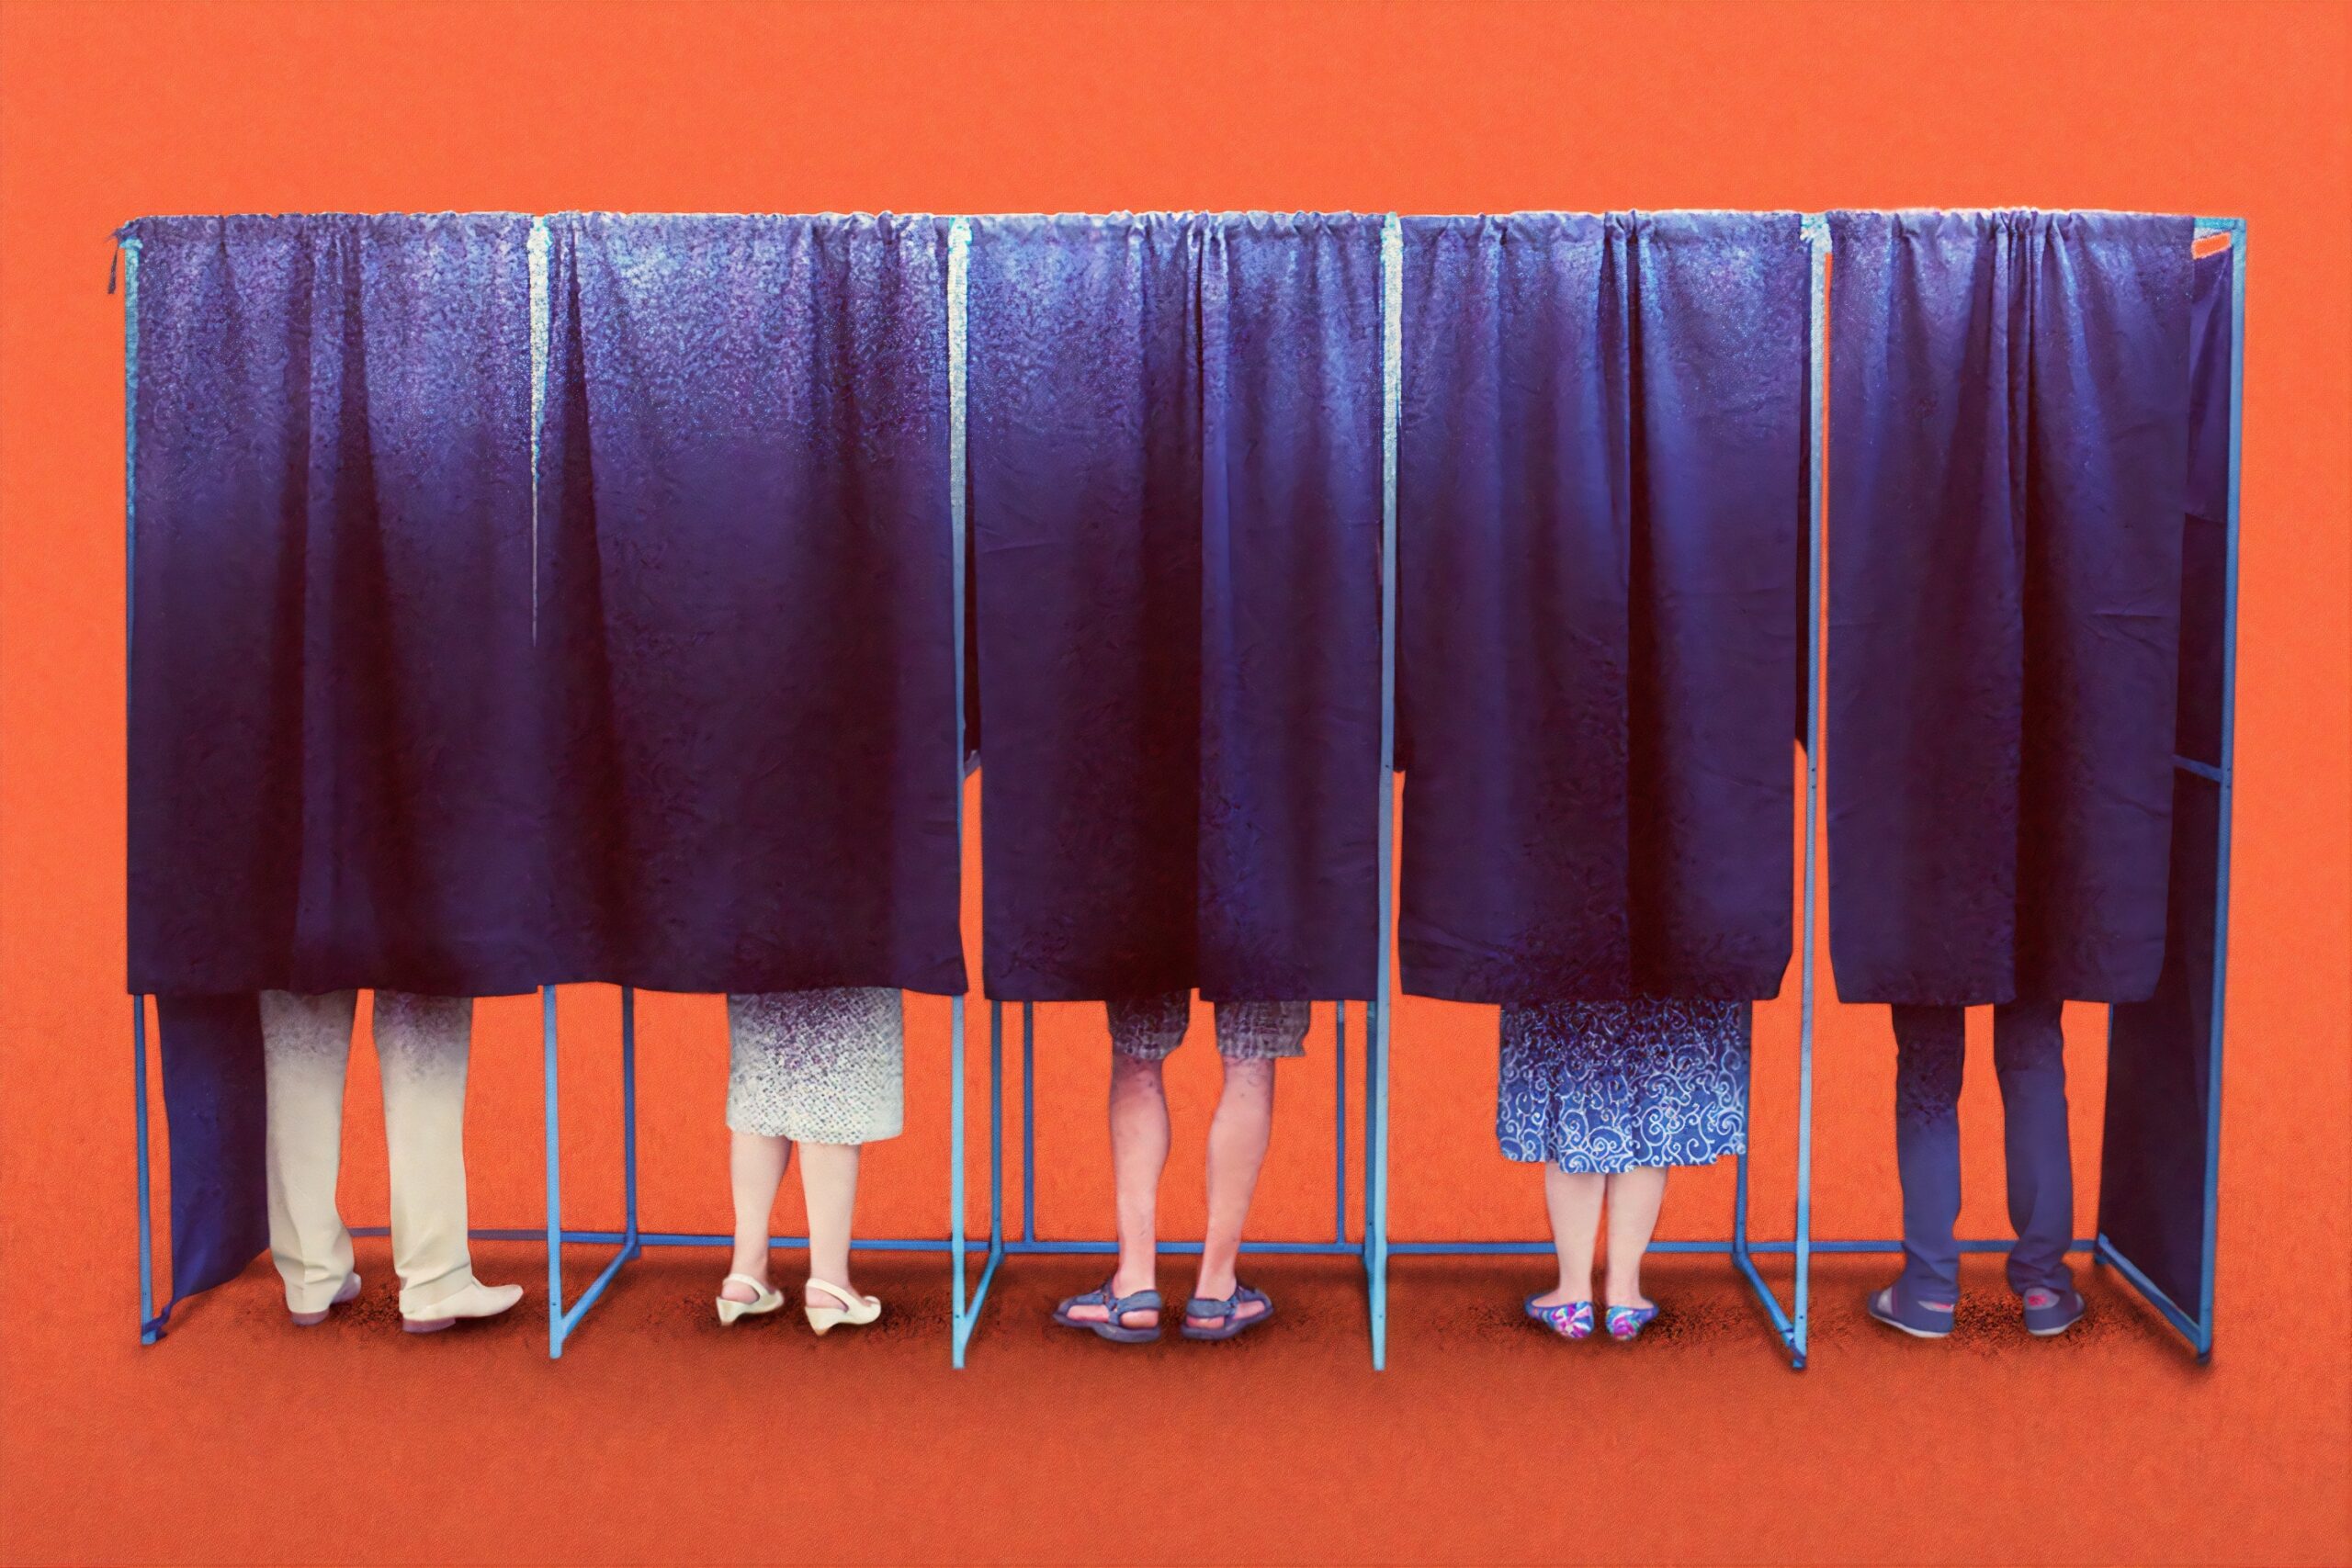 Five people stand in polling stations, white legs exposed but torsos hidden behind curtains. How hard will it be to recreate this scene in November?